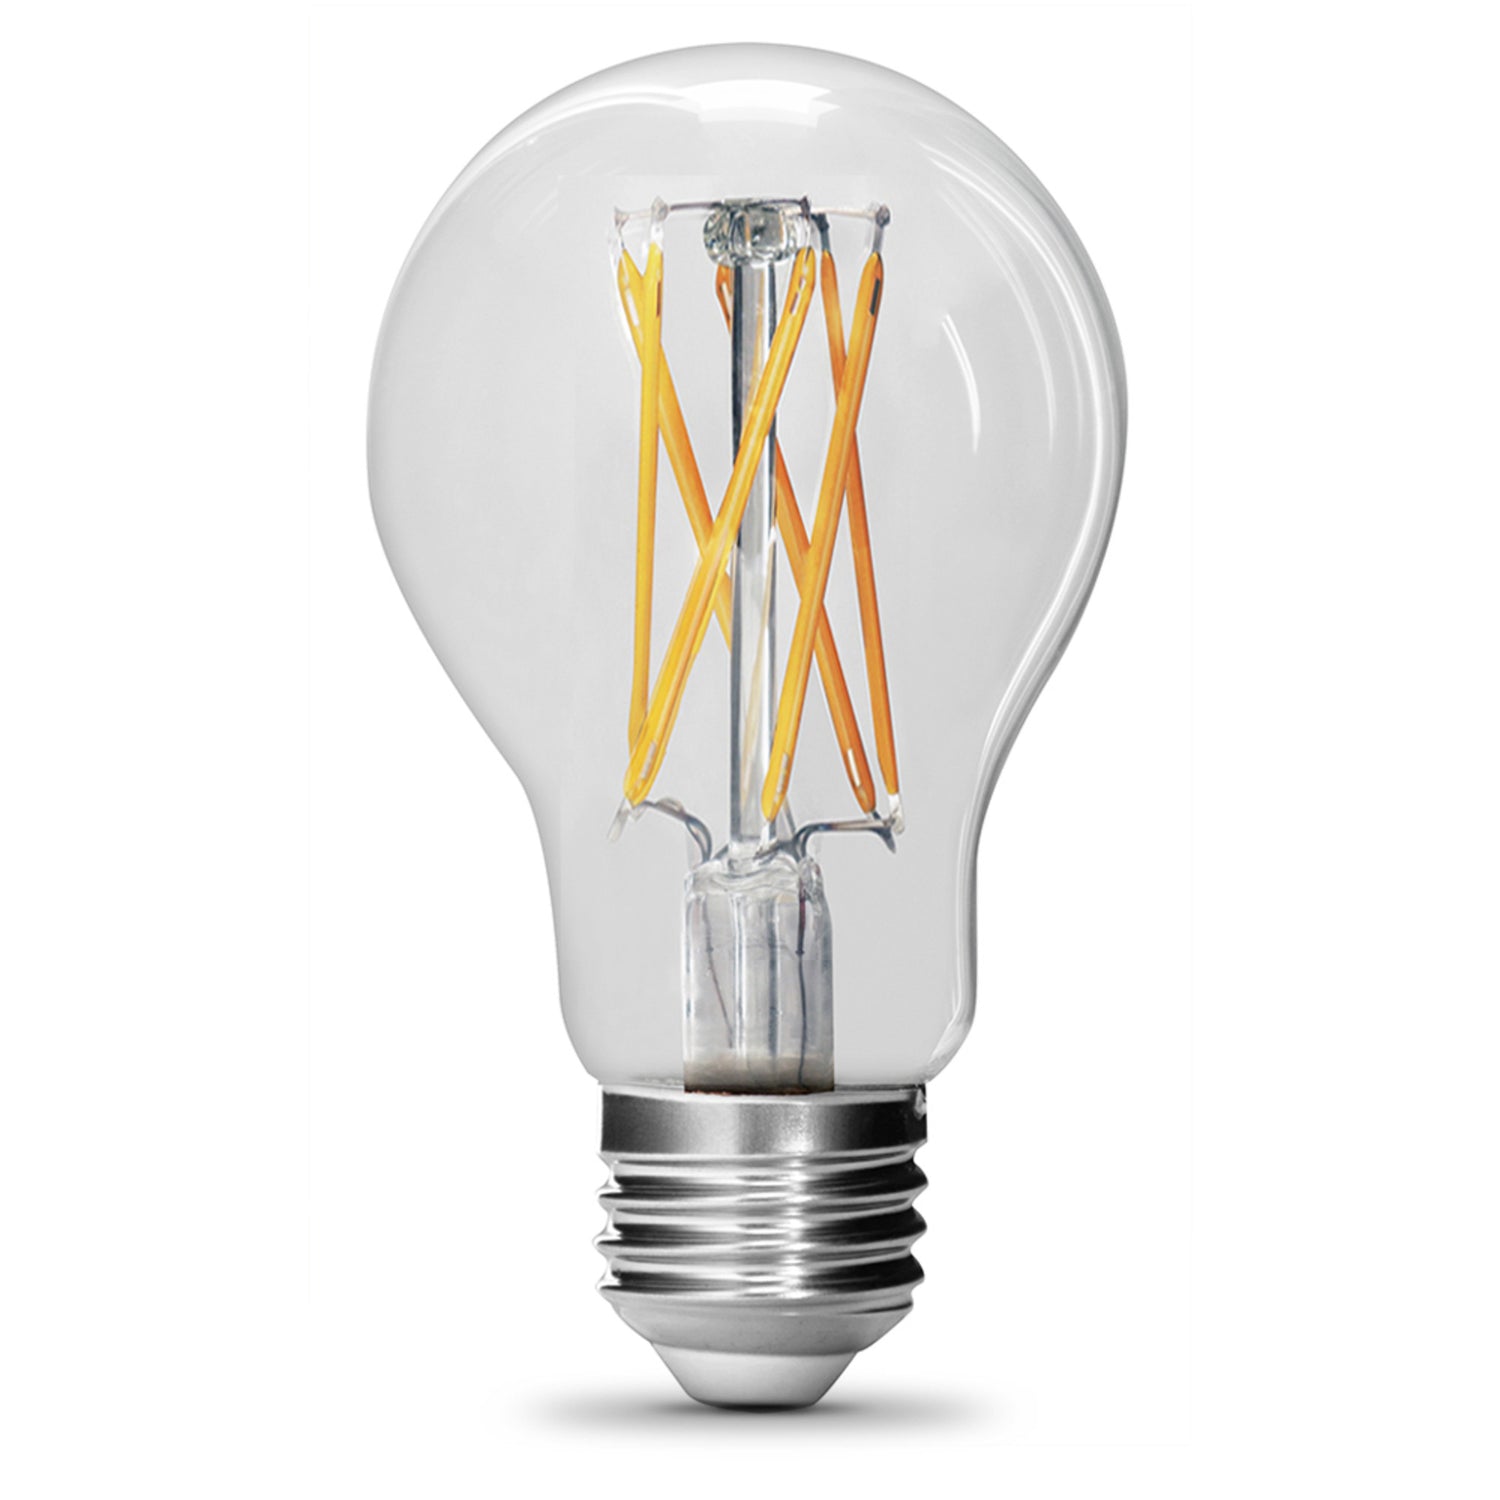 12W (75W Replacement) Soft White (2700K) A19 (E26 Base) Dimmable Clear Glass Enhance LED Filament Light Bulb (2-Pack)